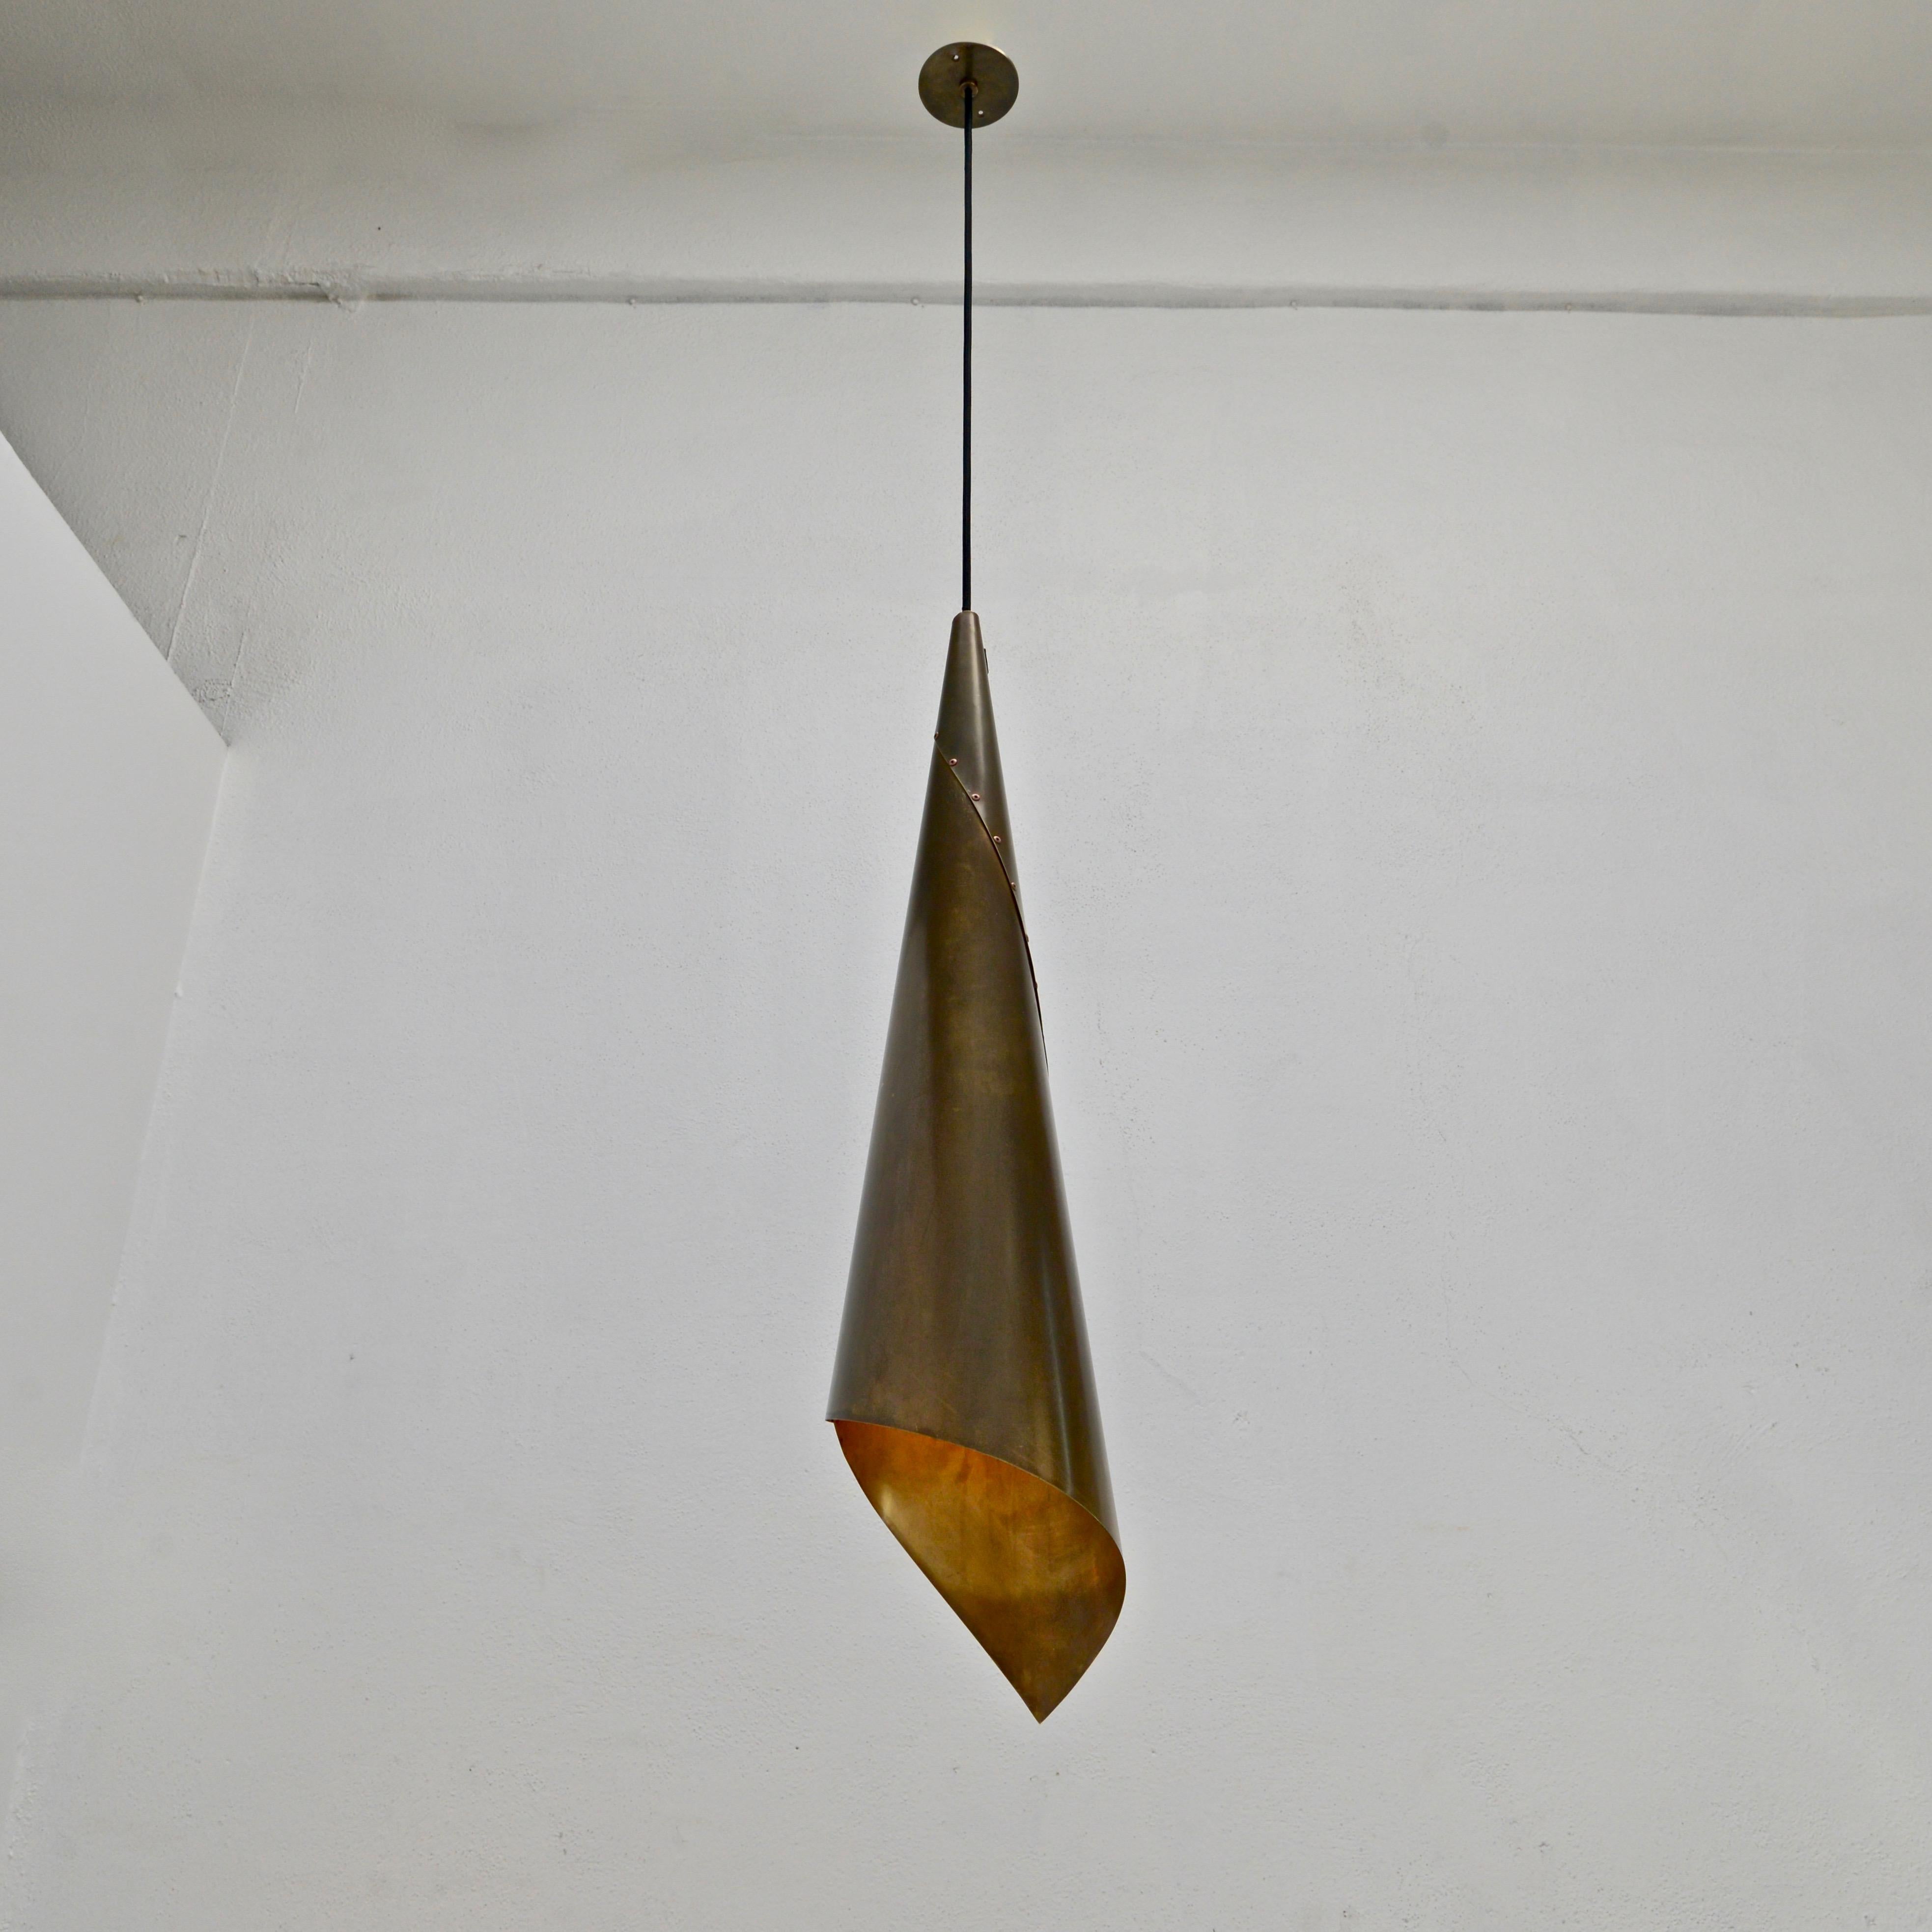 Rustic and raw yet soft and elegant handcrafted pendant by Lumfardo Luminaires. Brass is un-lacquered and naturally patinated. Made to order. Custom finish and OAD can be made upon request. One E26 medium based light socket per shade. Priced